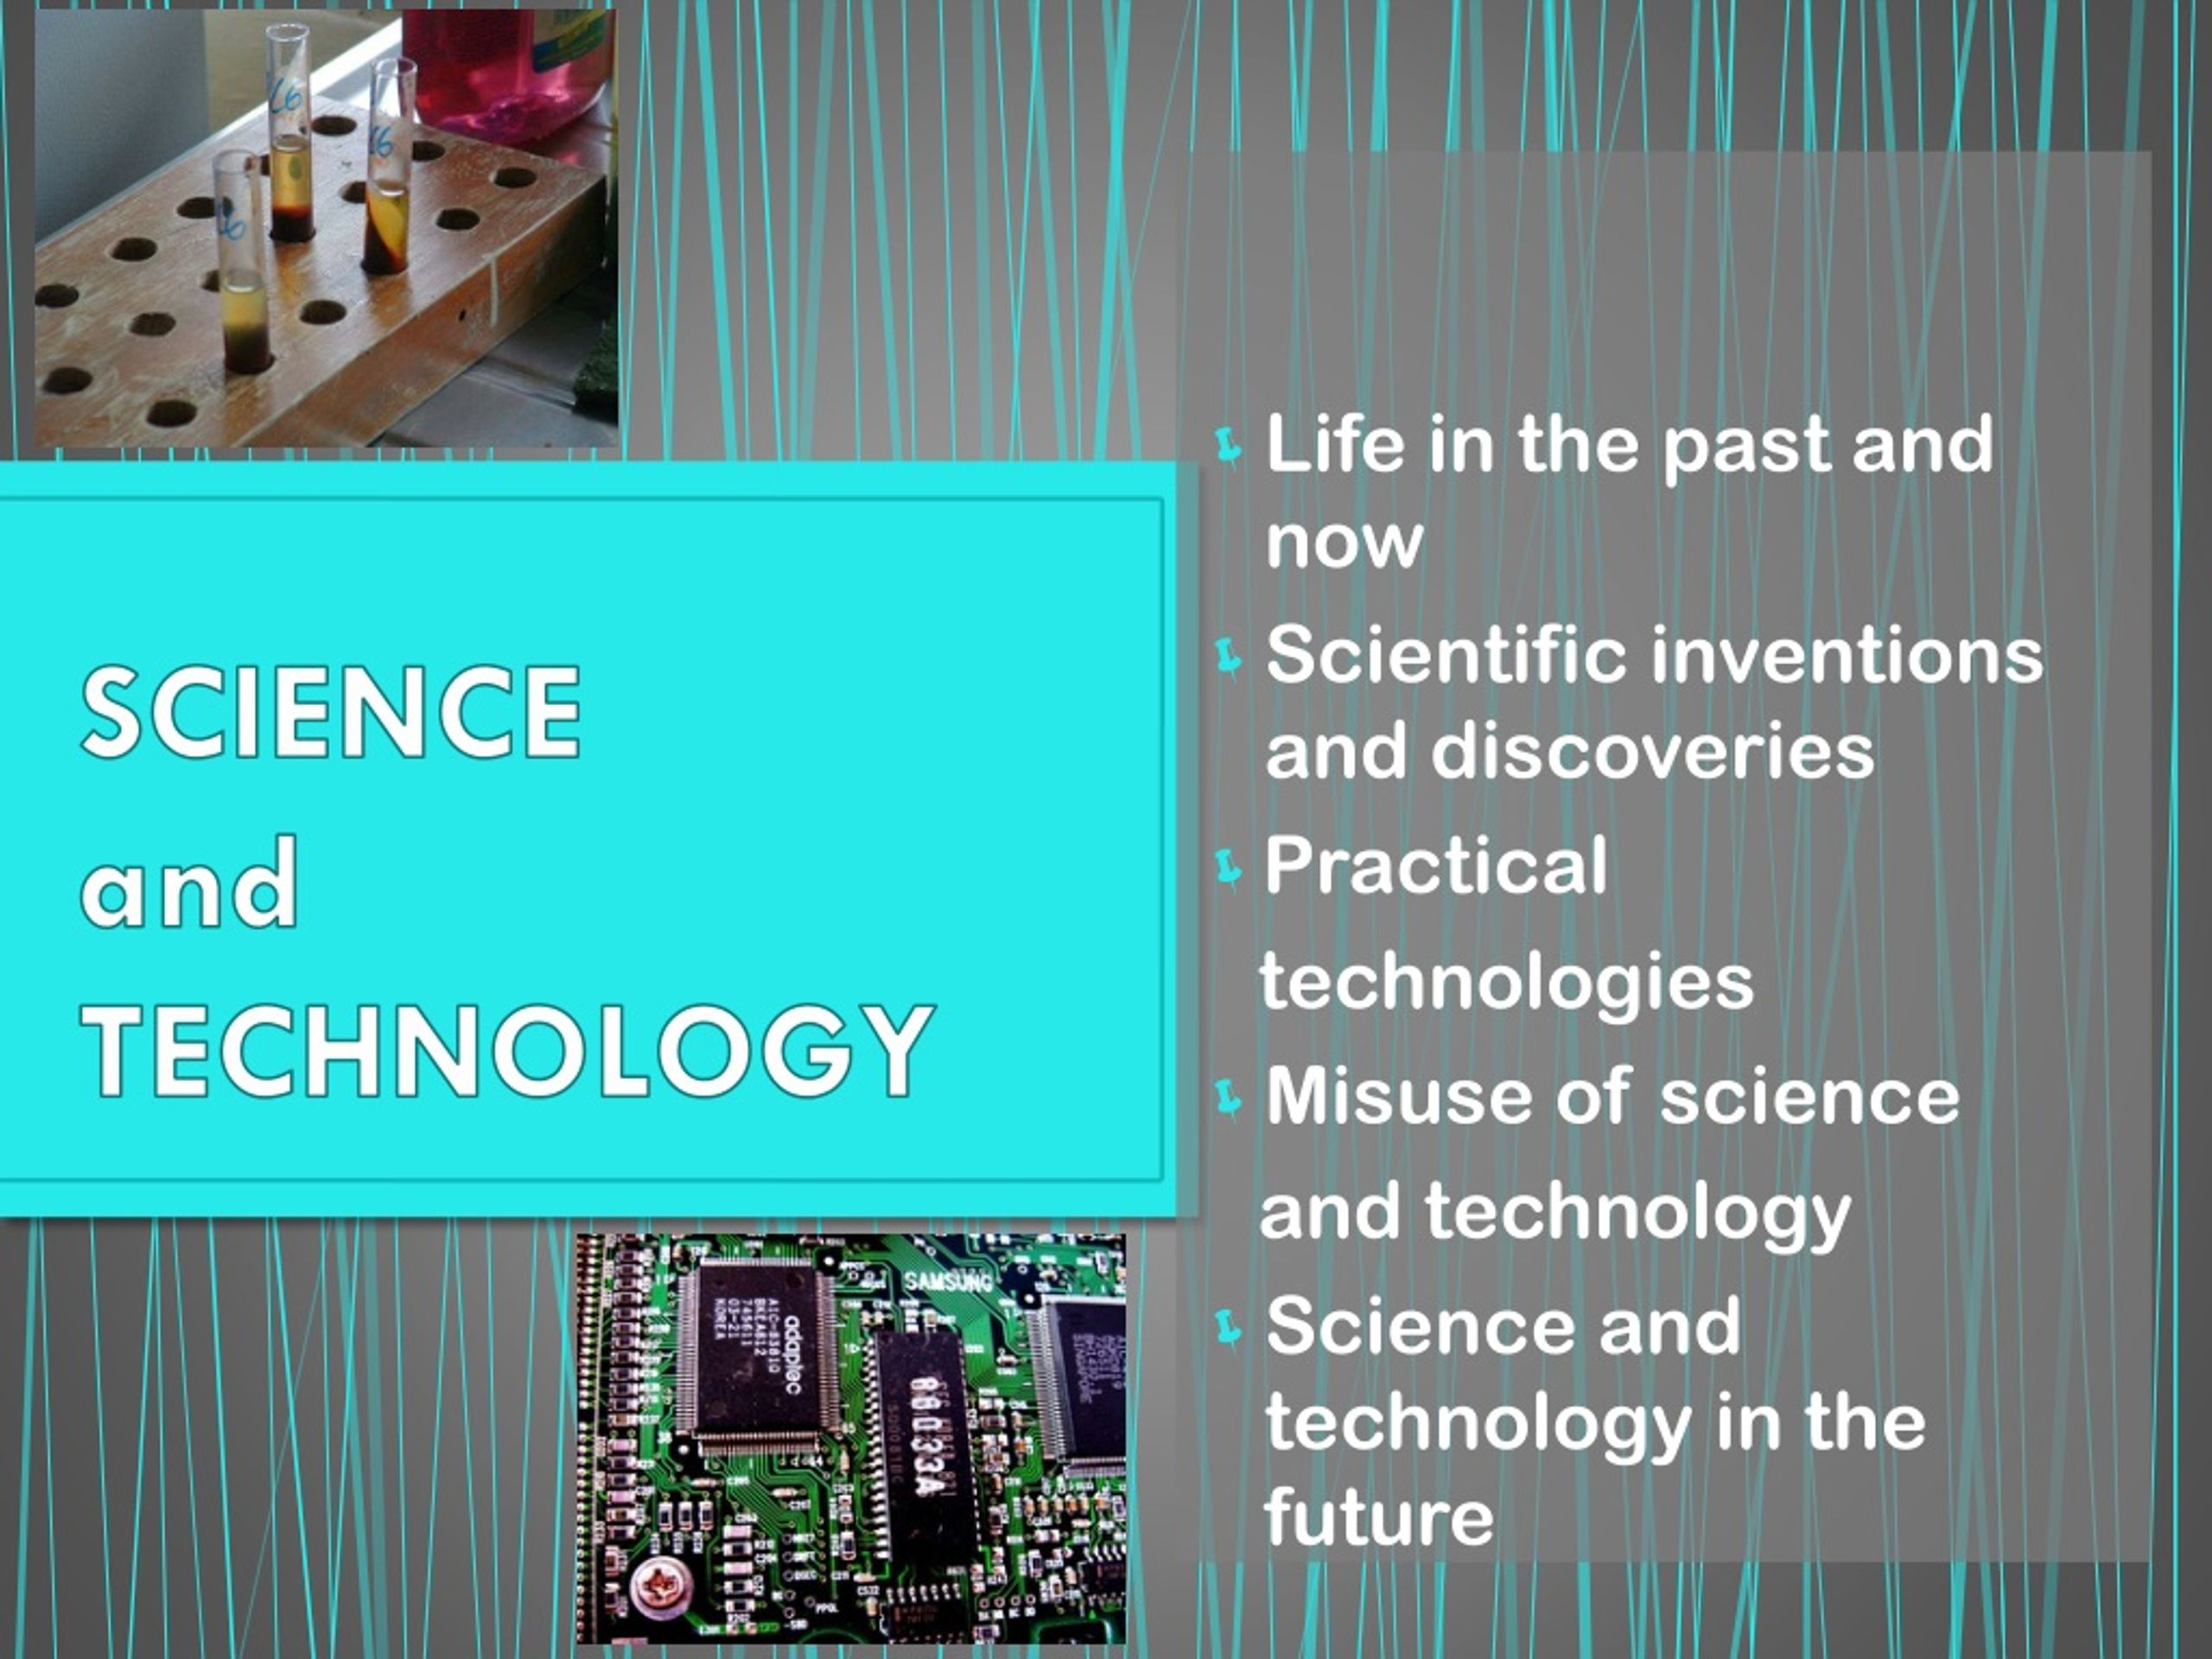 ppt presentation on science and technology